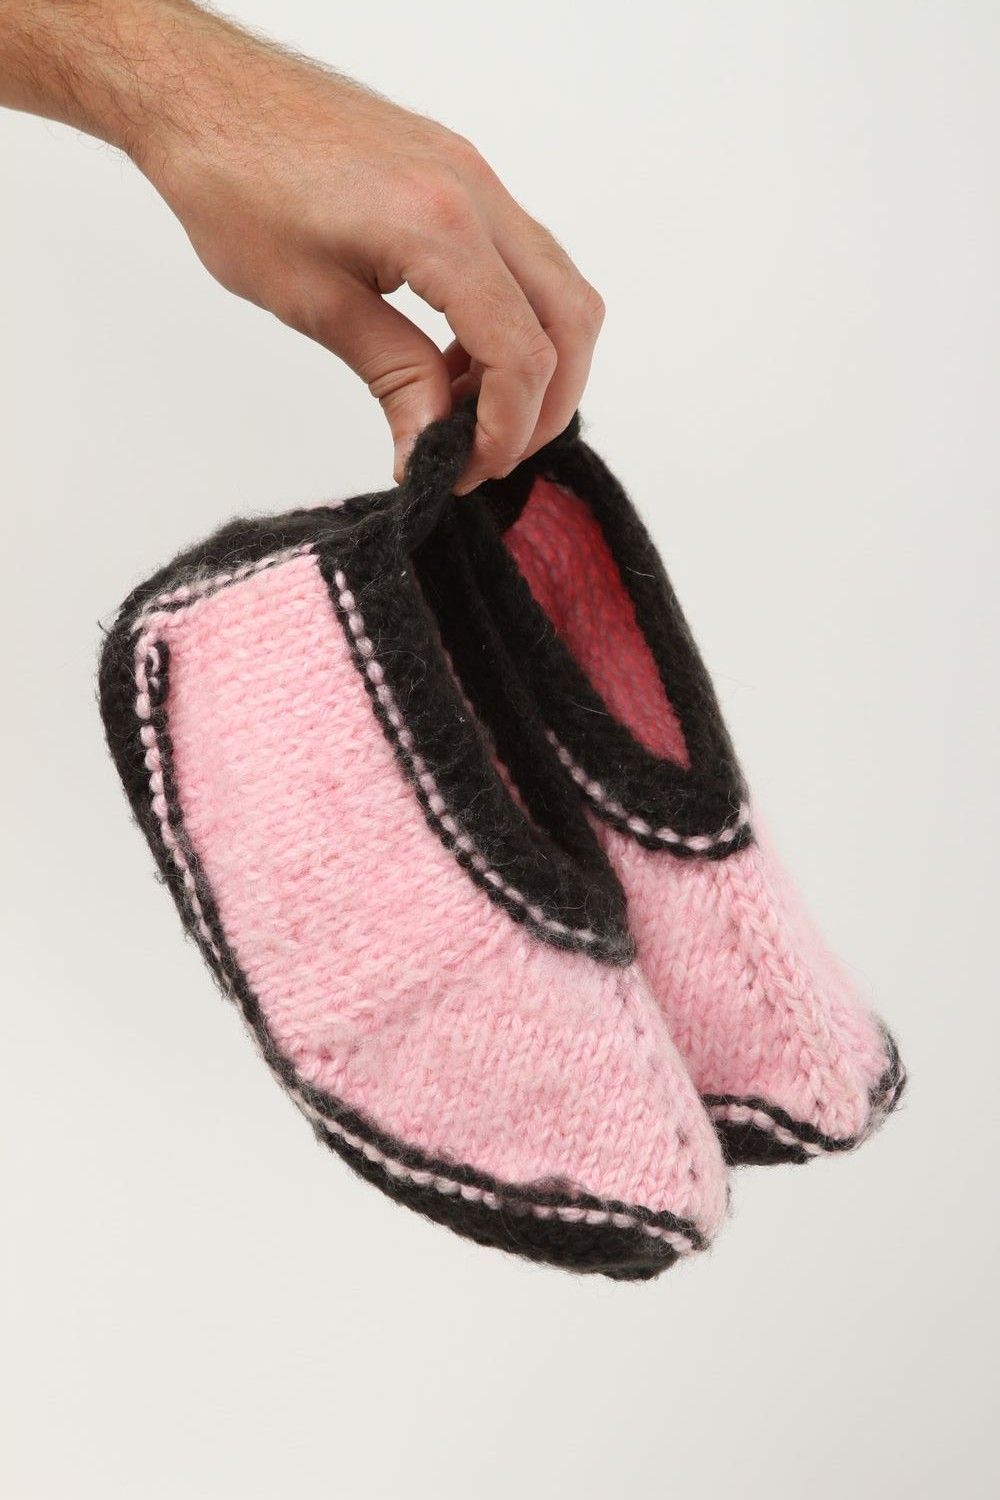 Stylish handmade knitted slippers womens footwear design wool house shoes photo 1